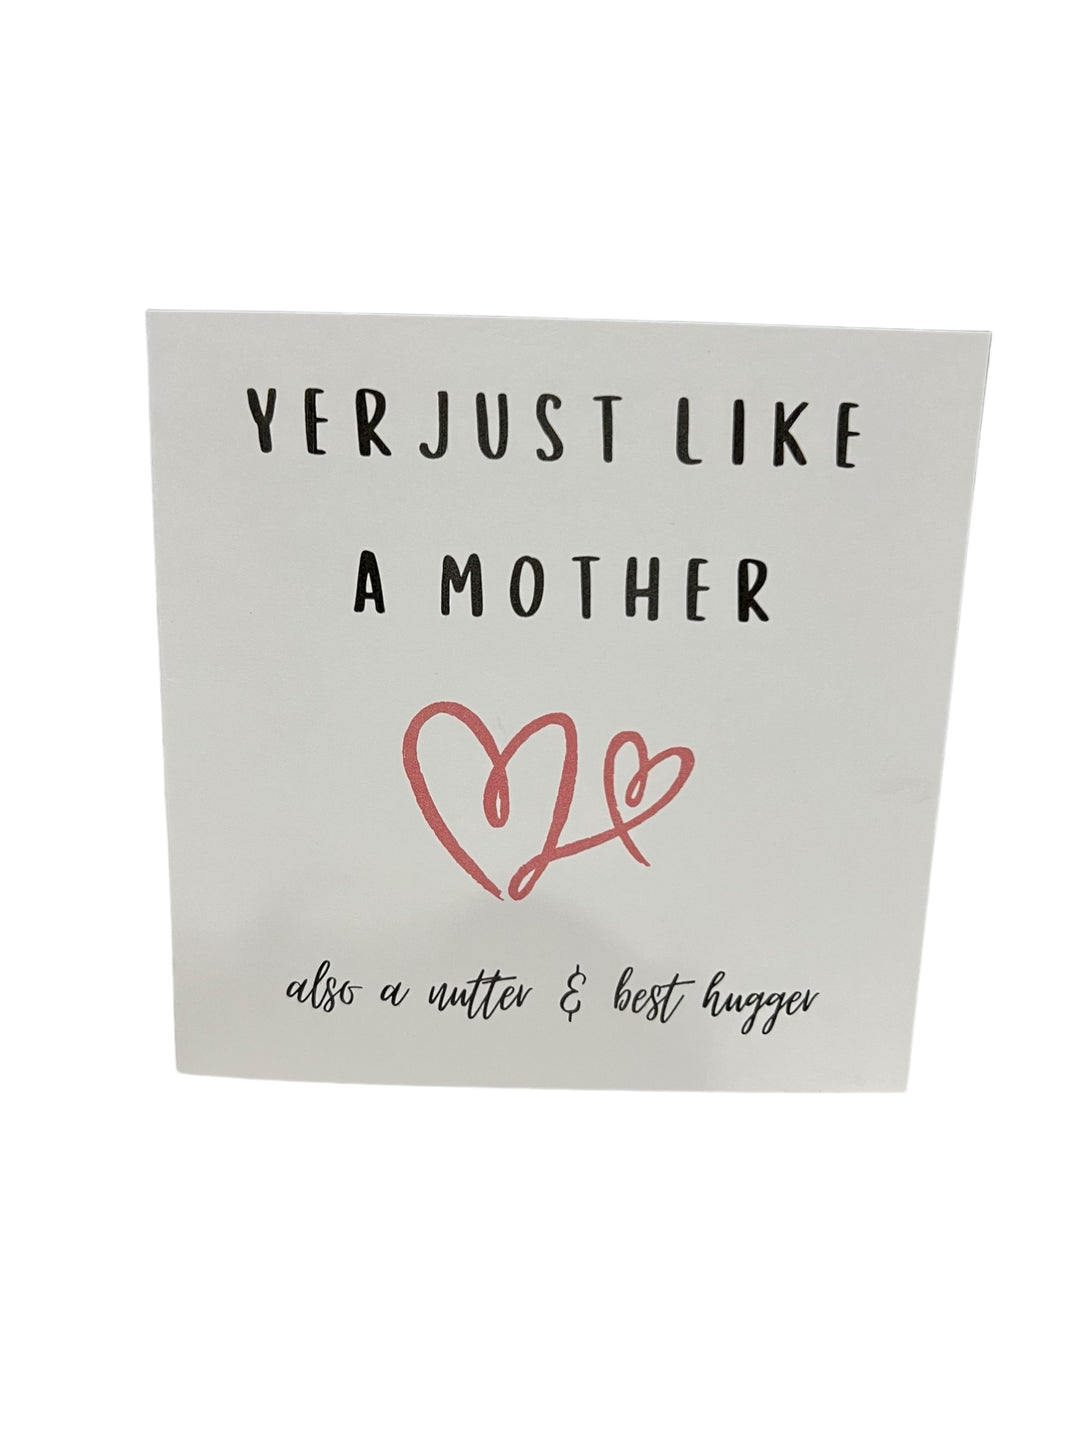 Our Exclusive Mother's Day Card Collection